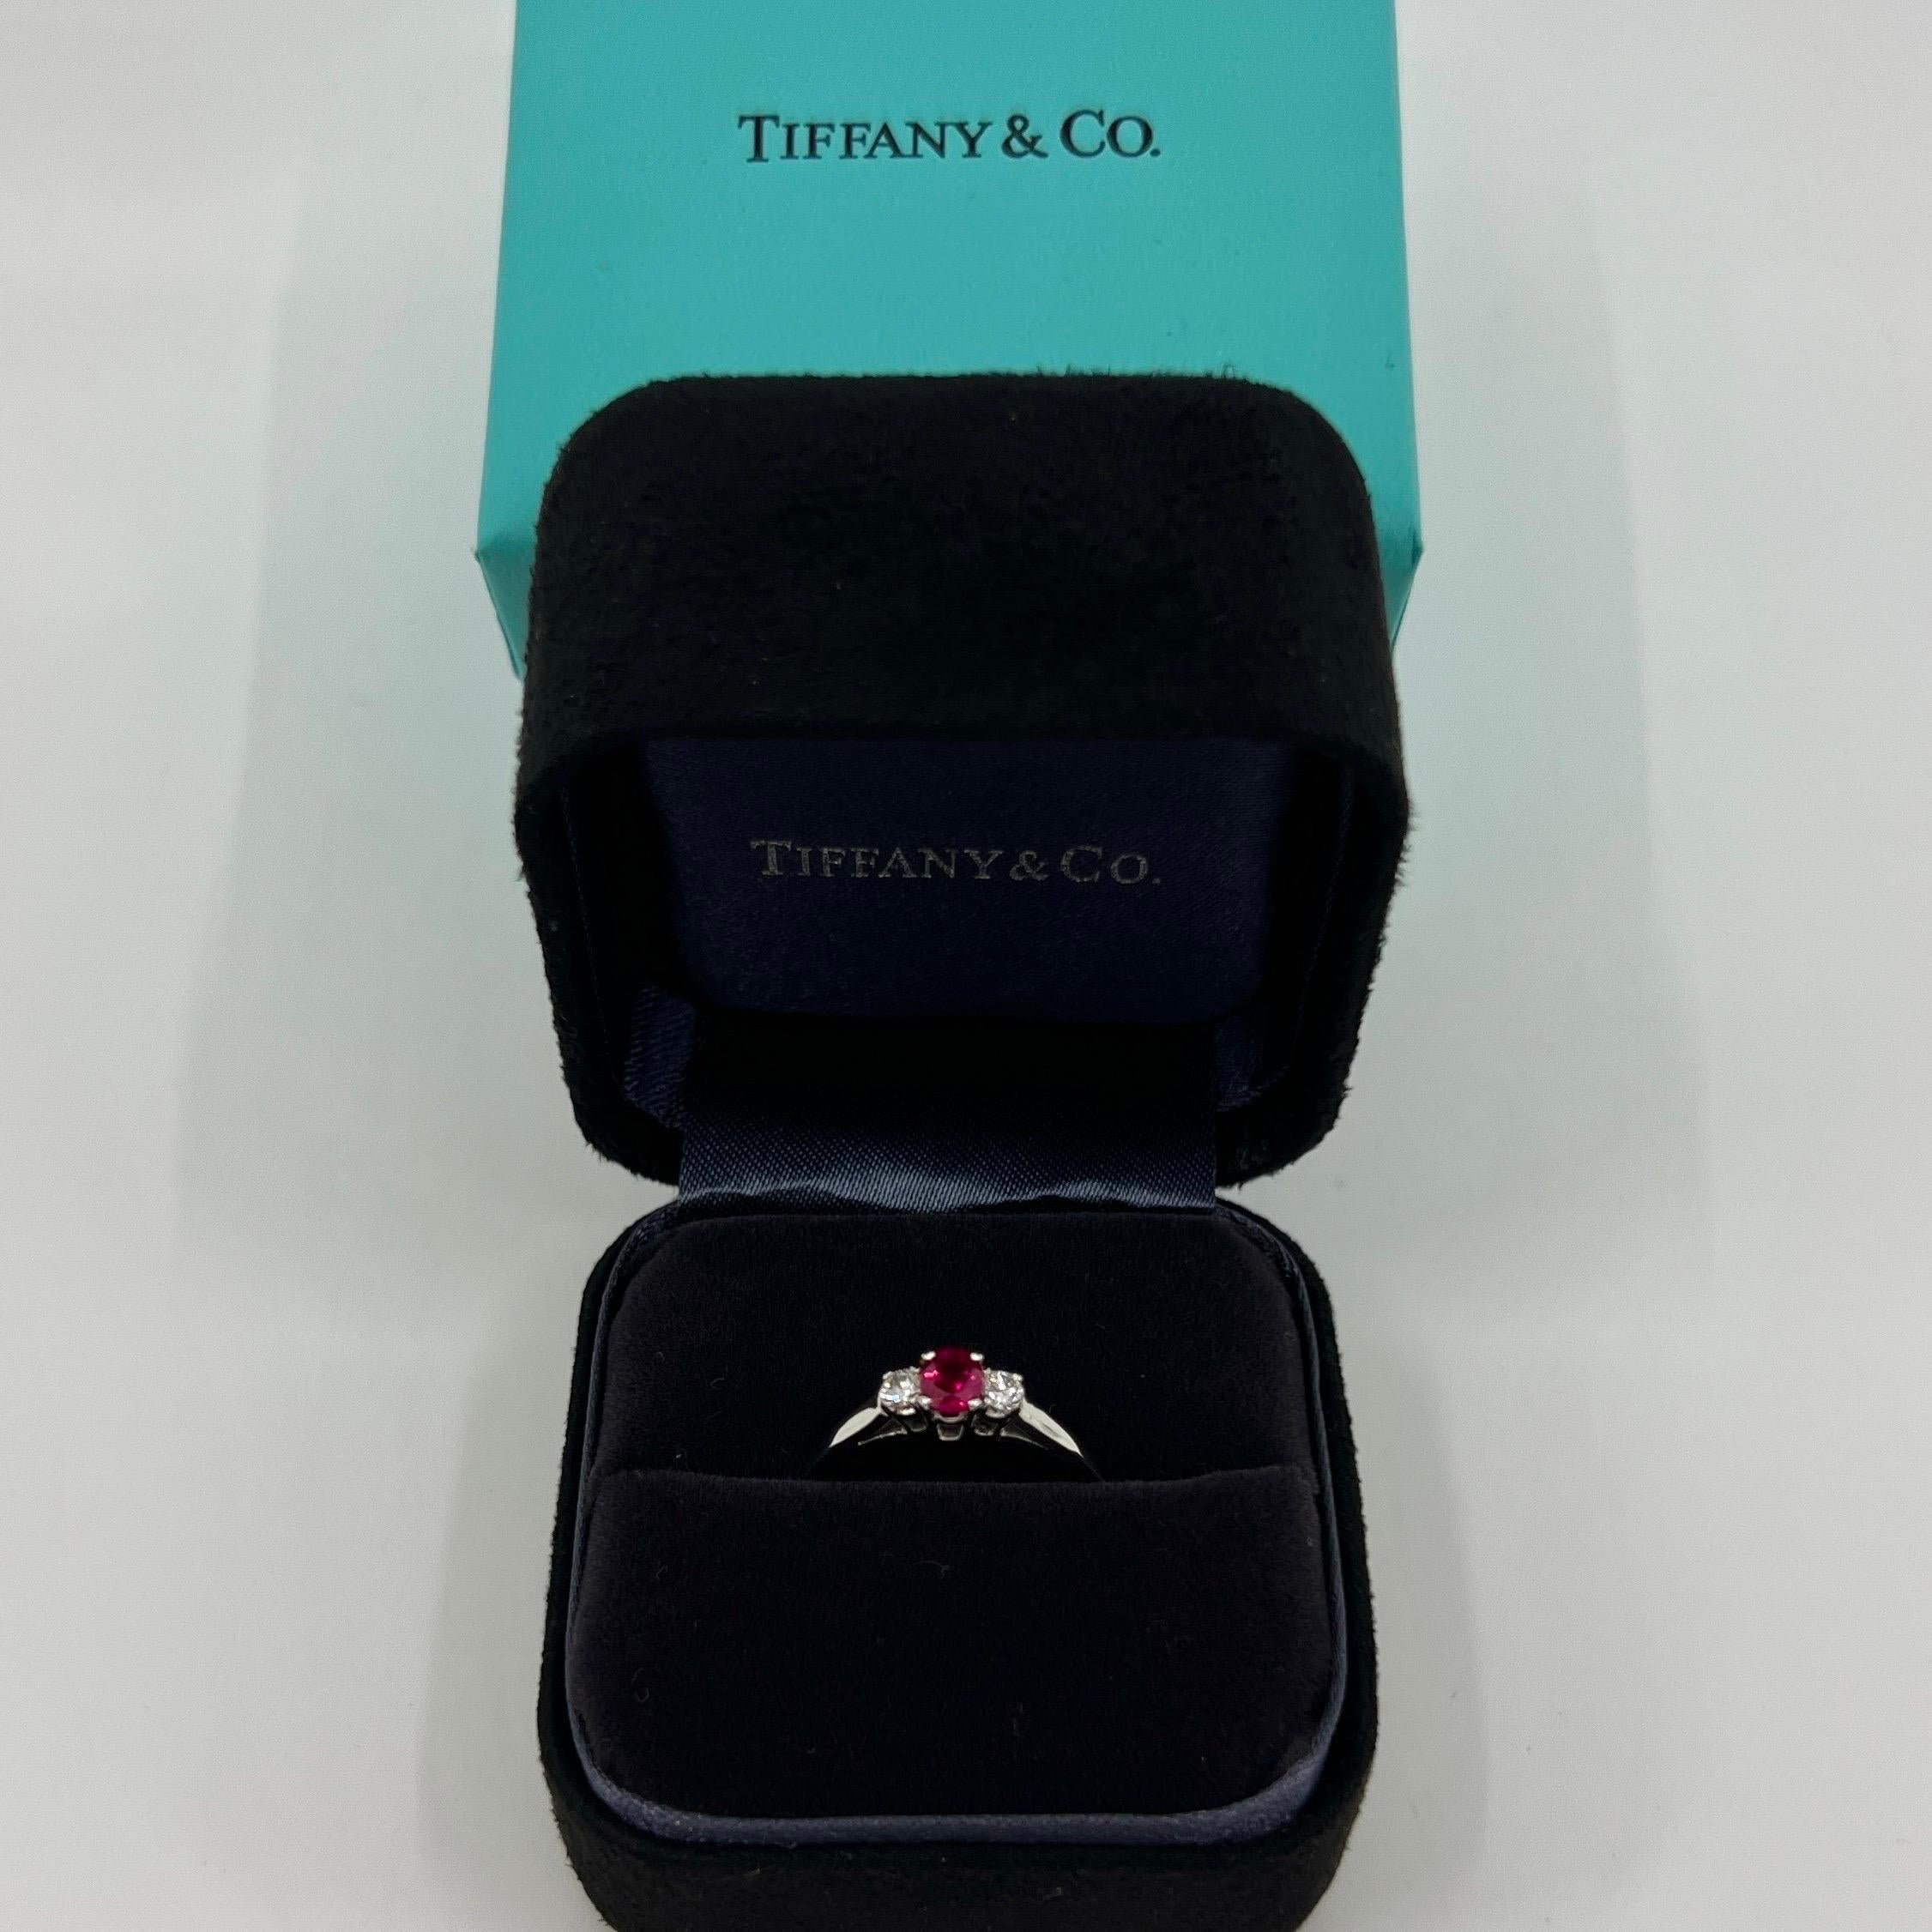 Vintage Tiffany & Co Oval Cut Pink Red Ruby And Diamond Platinum Three Stone Ring.

Fine jewellery houses like Tiffany only use the finest diamonds and gemstones in their jewellery and this piece is no exception. A top quality 4.5x3.7mm oval cut